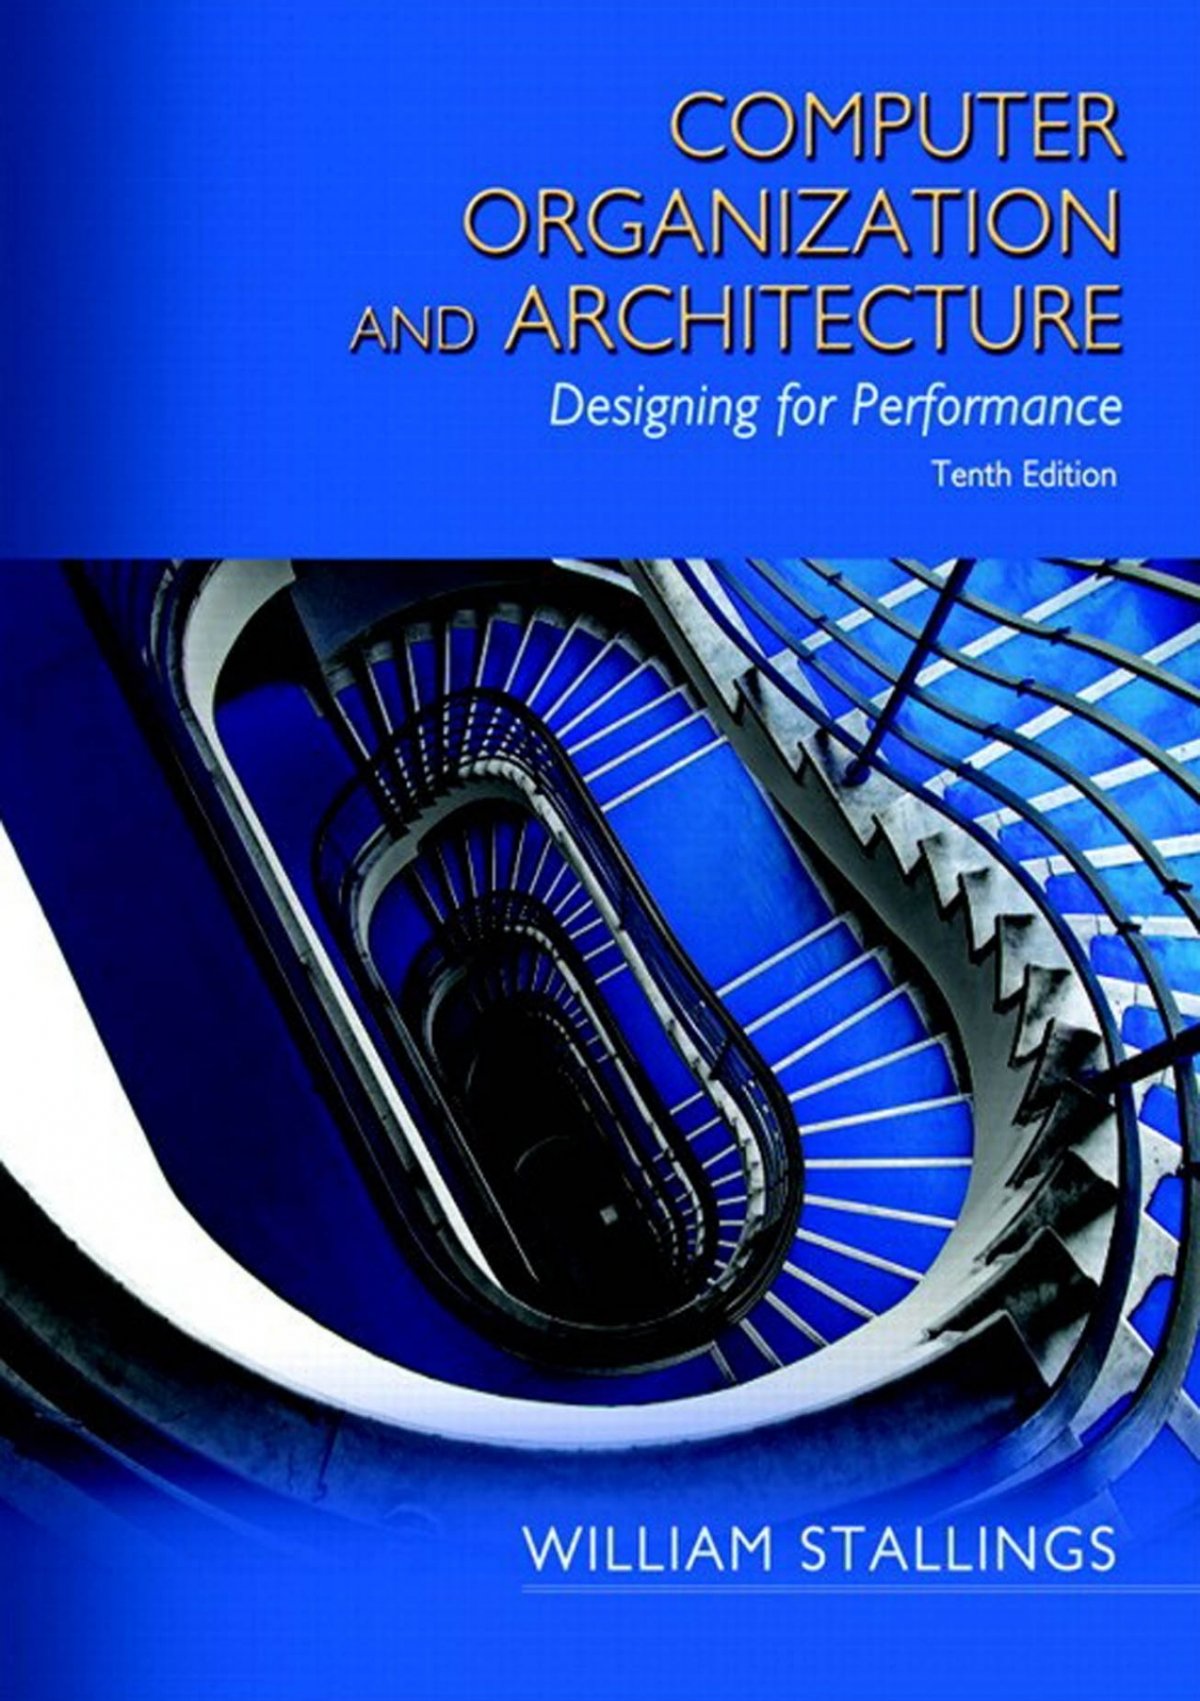 computer organization and architecture research paper